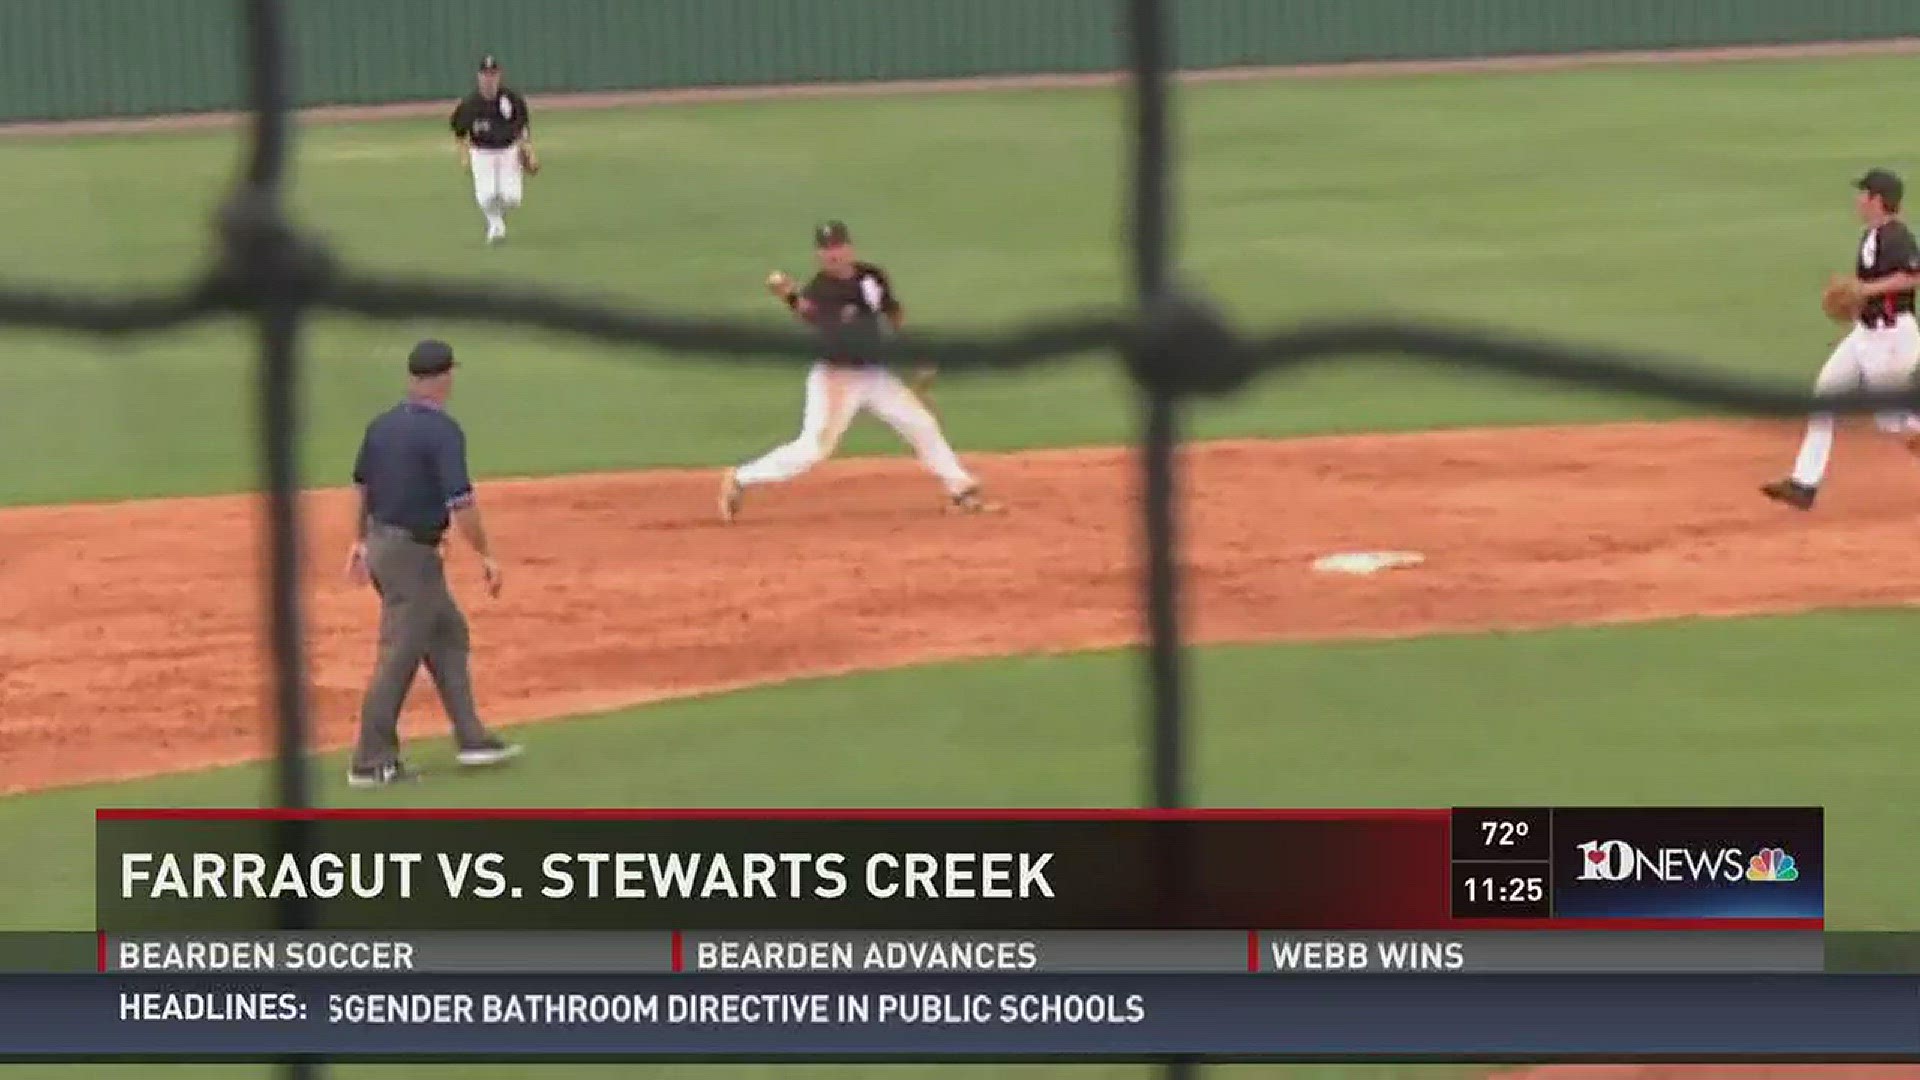 Farragut jumped out to an early 4-0 lead but a six-run fourth inning for Stewarts Creek doomed the Admirals.